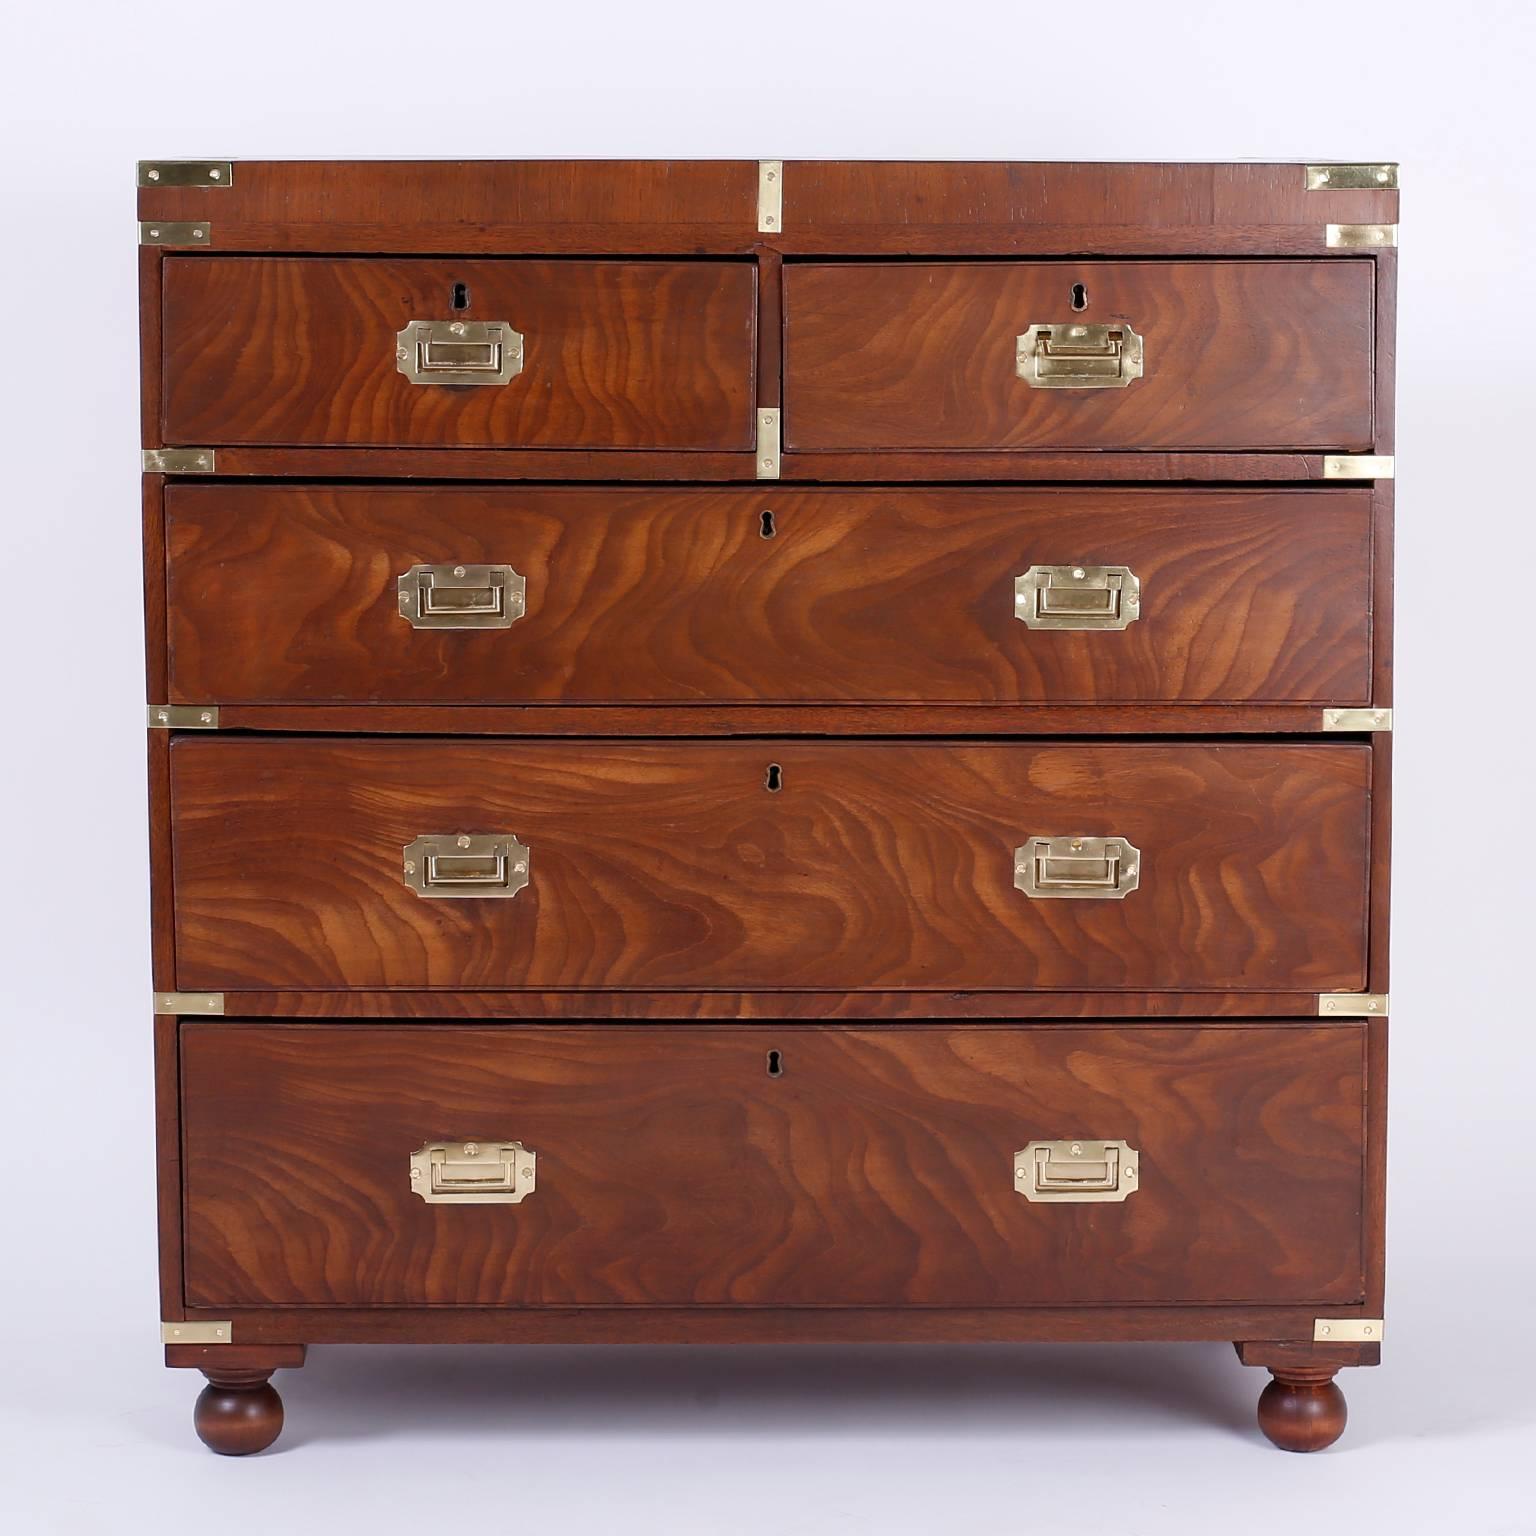 Handsome and historically significant Campaign chest of drawers crafted with exotic grained tropical mahogany on the front. The Classic Campaign protective hardware is hand polished brass and the chest is on ball feet. The back of the case was lined